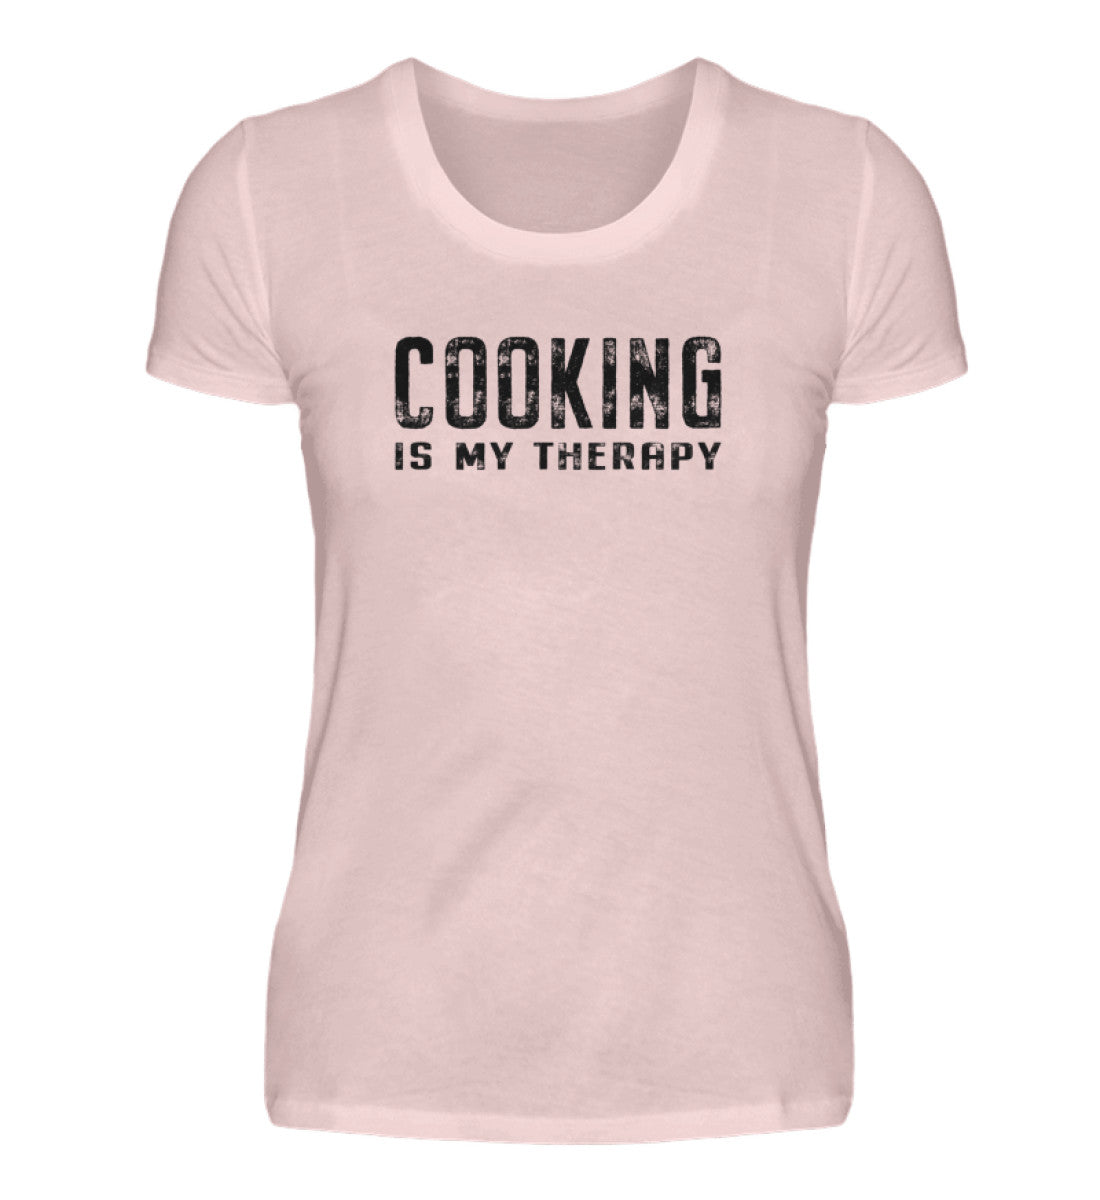 Cooking is my therapy  - Damen Premiumshirt